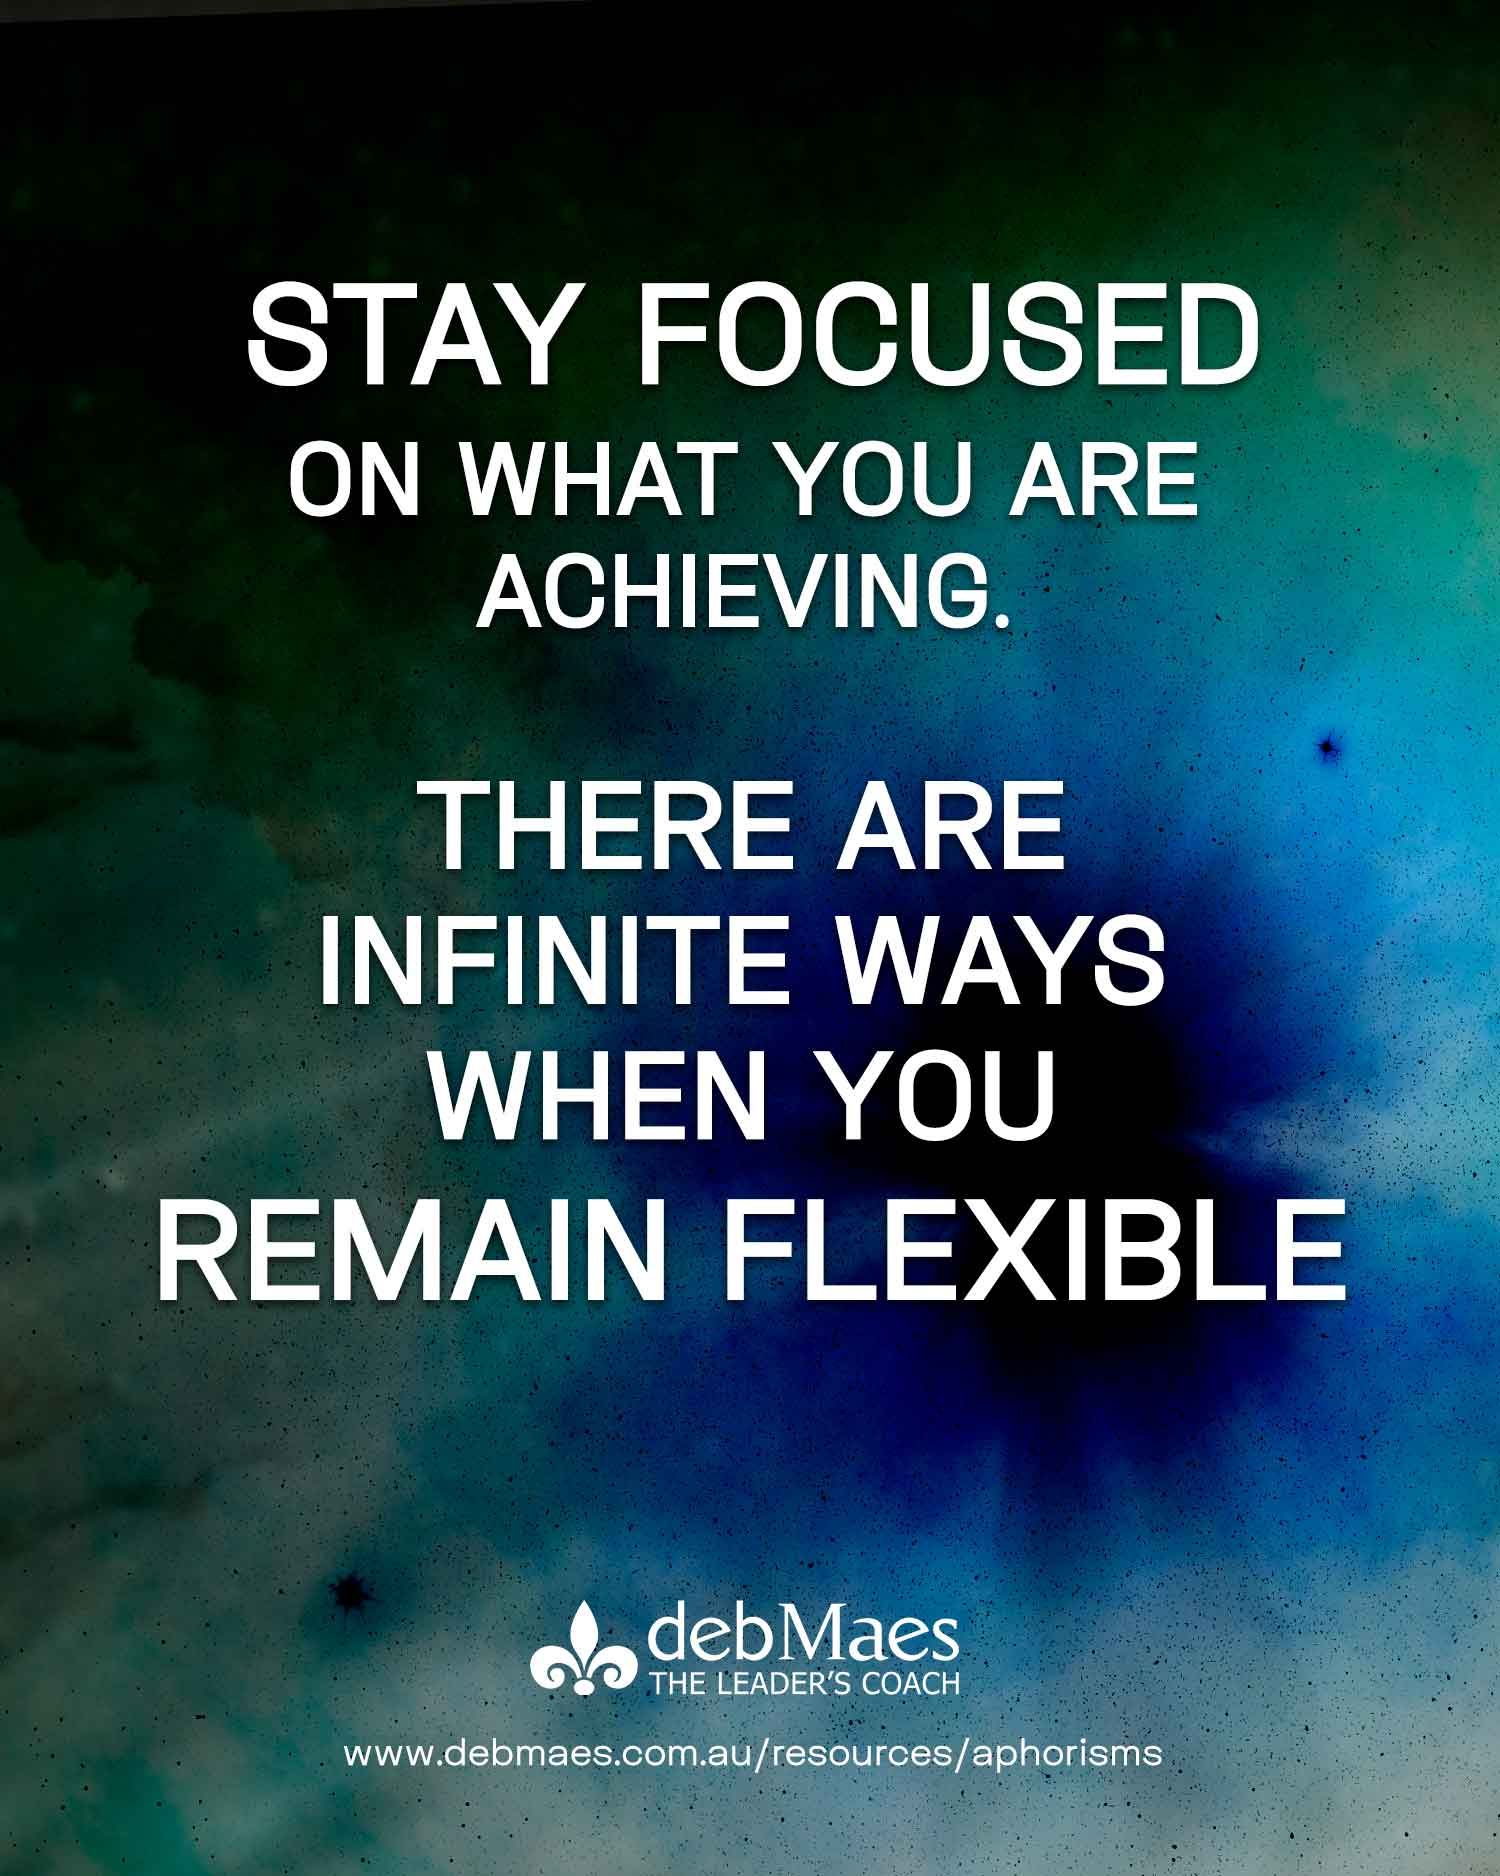 Stay focussed